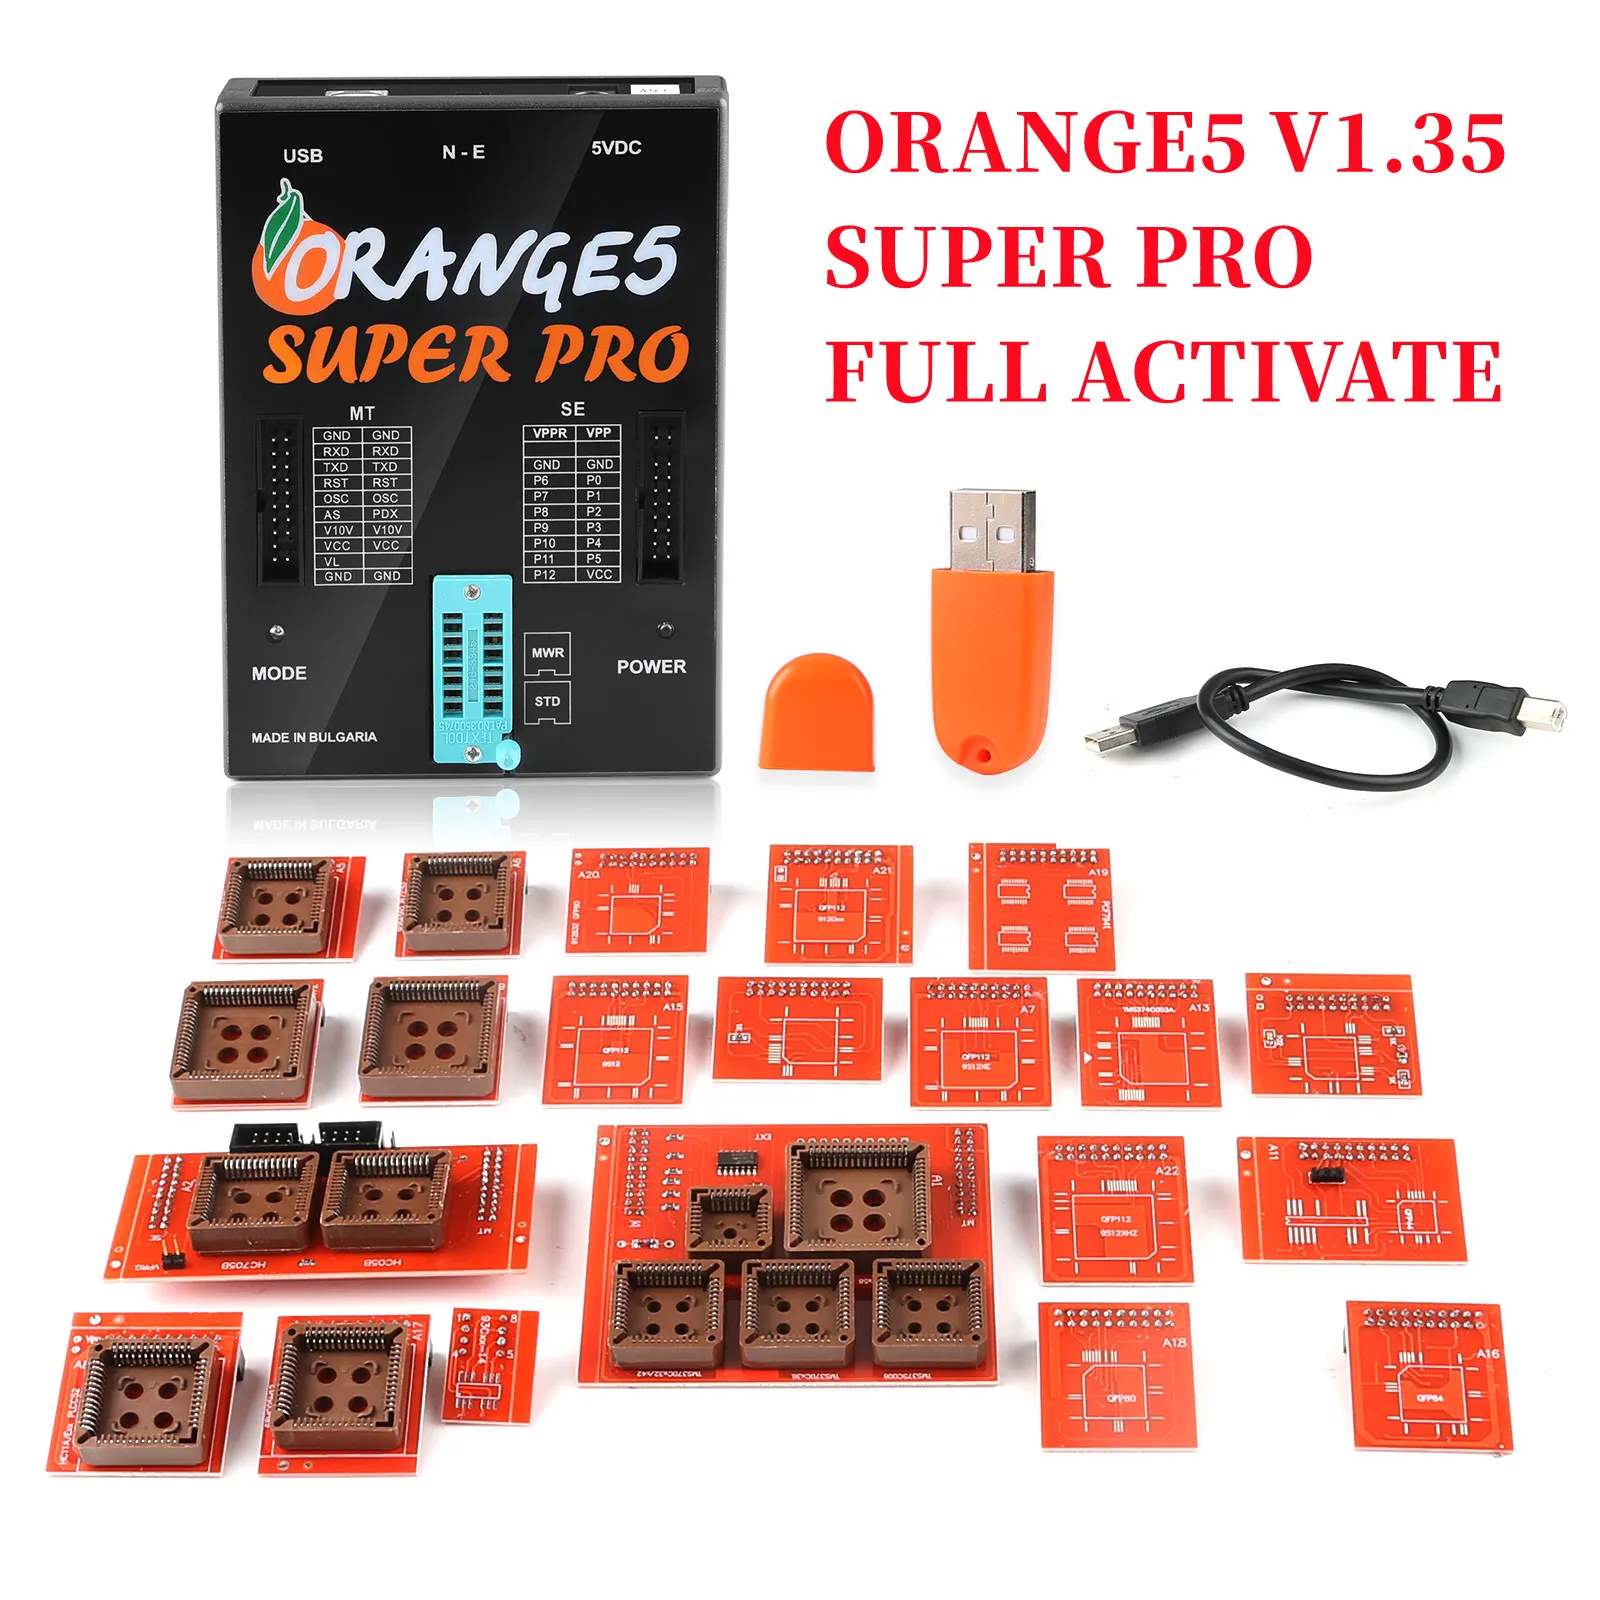 

Orange5 Super Pro V1.35 Programming Tool With Full Adapter USB Dongle For Airbag Dash Modules Fully Activated